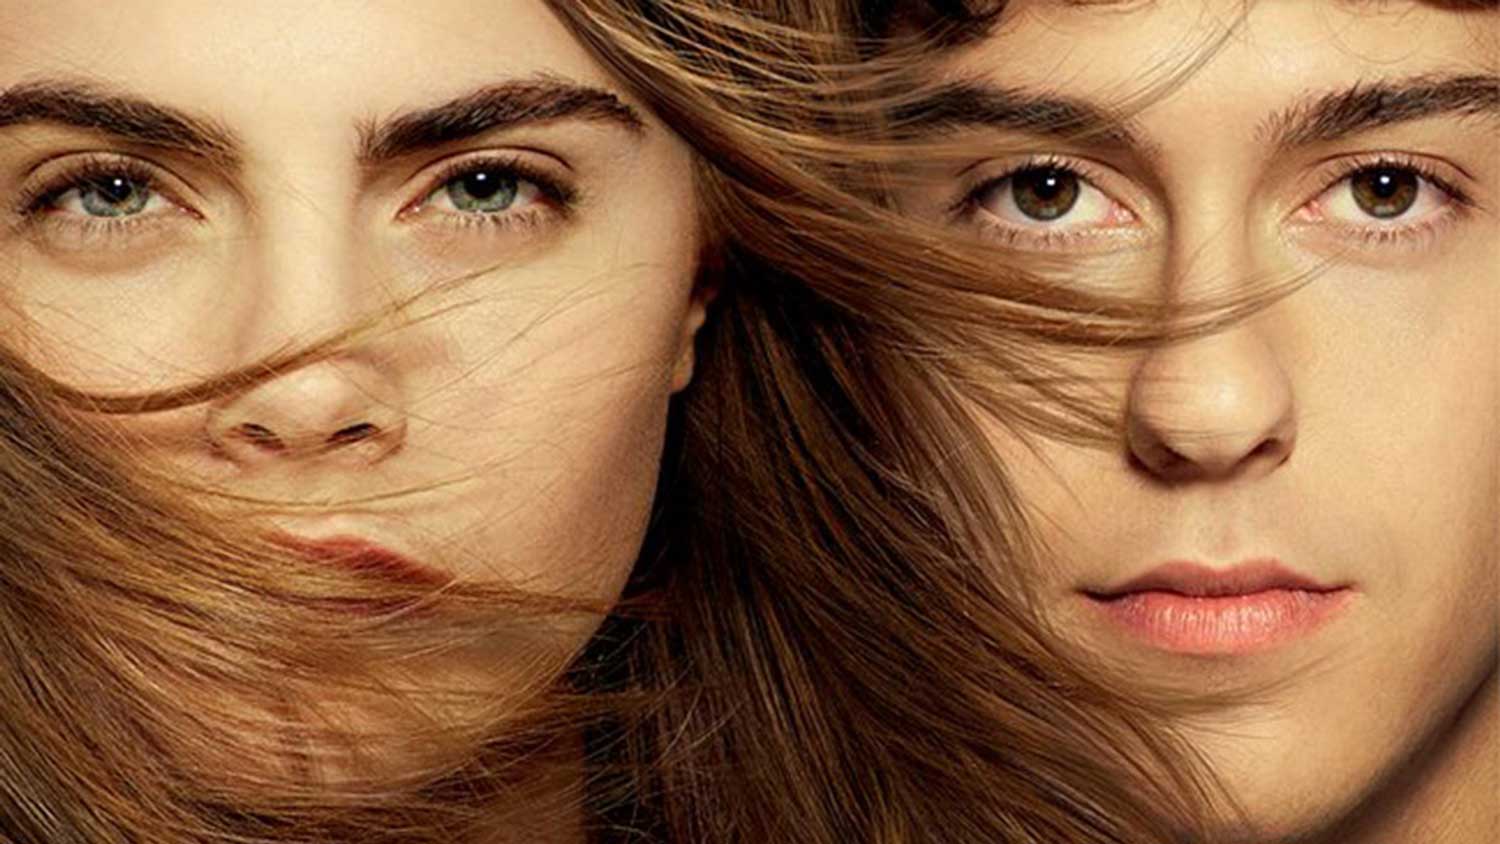 Paper Towns Movie